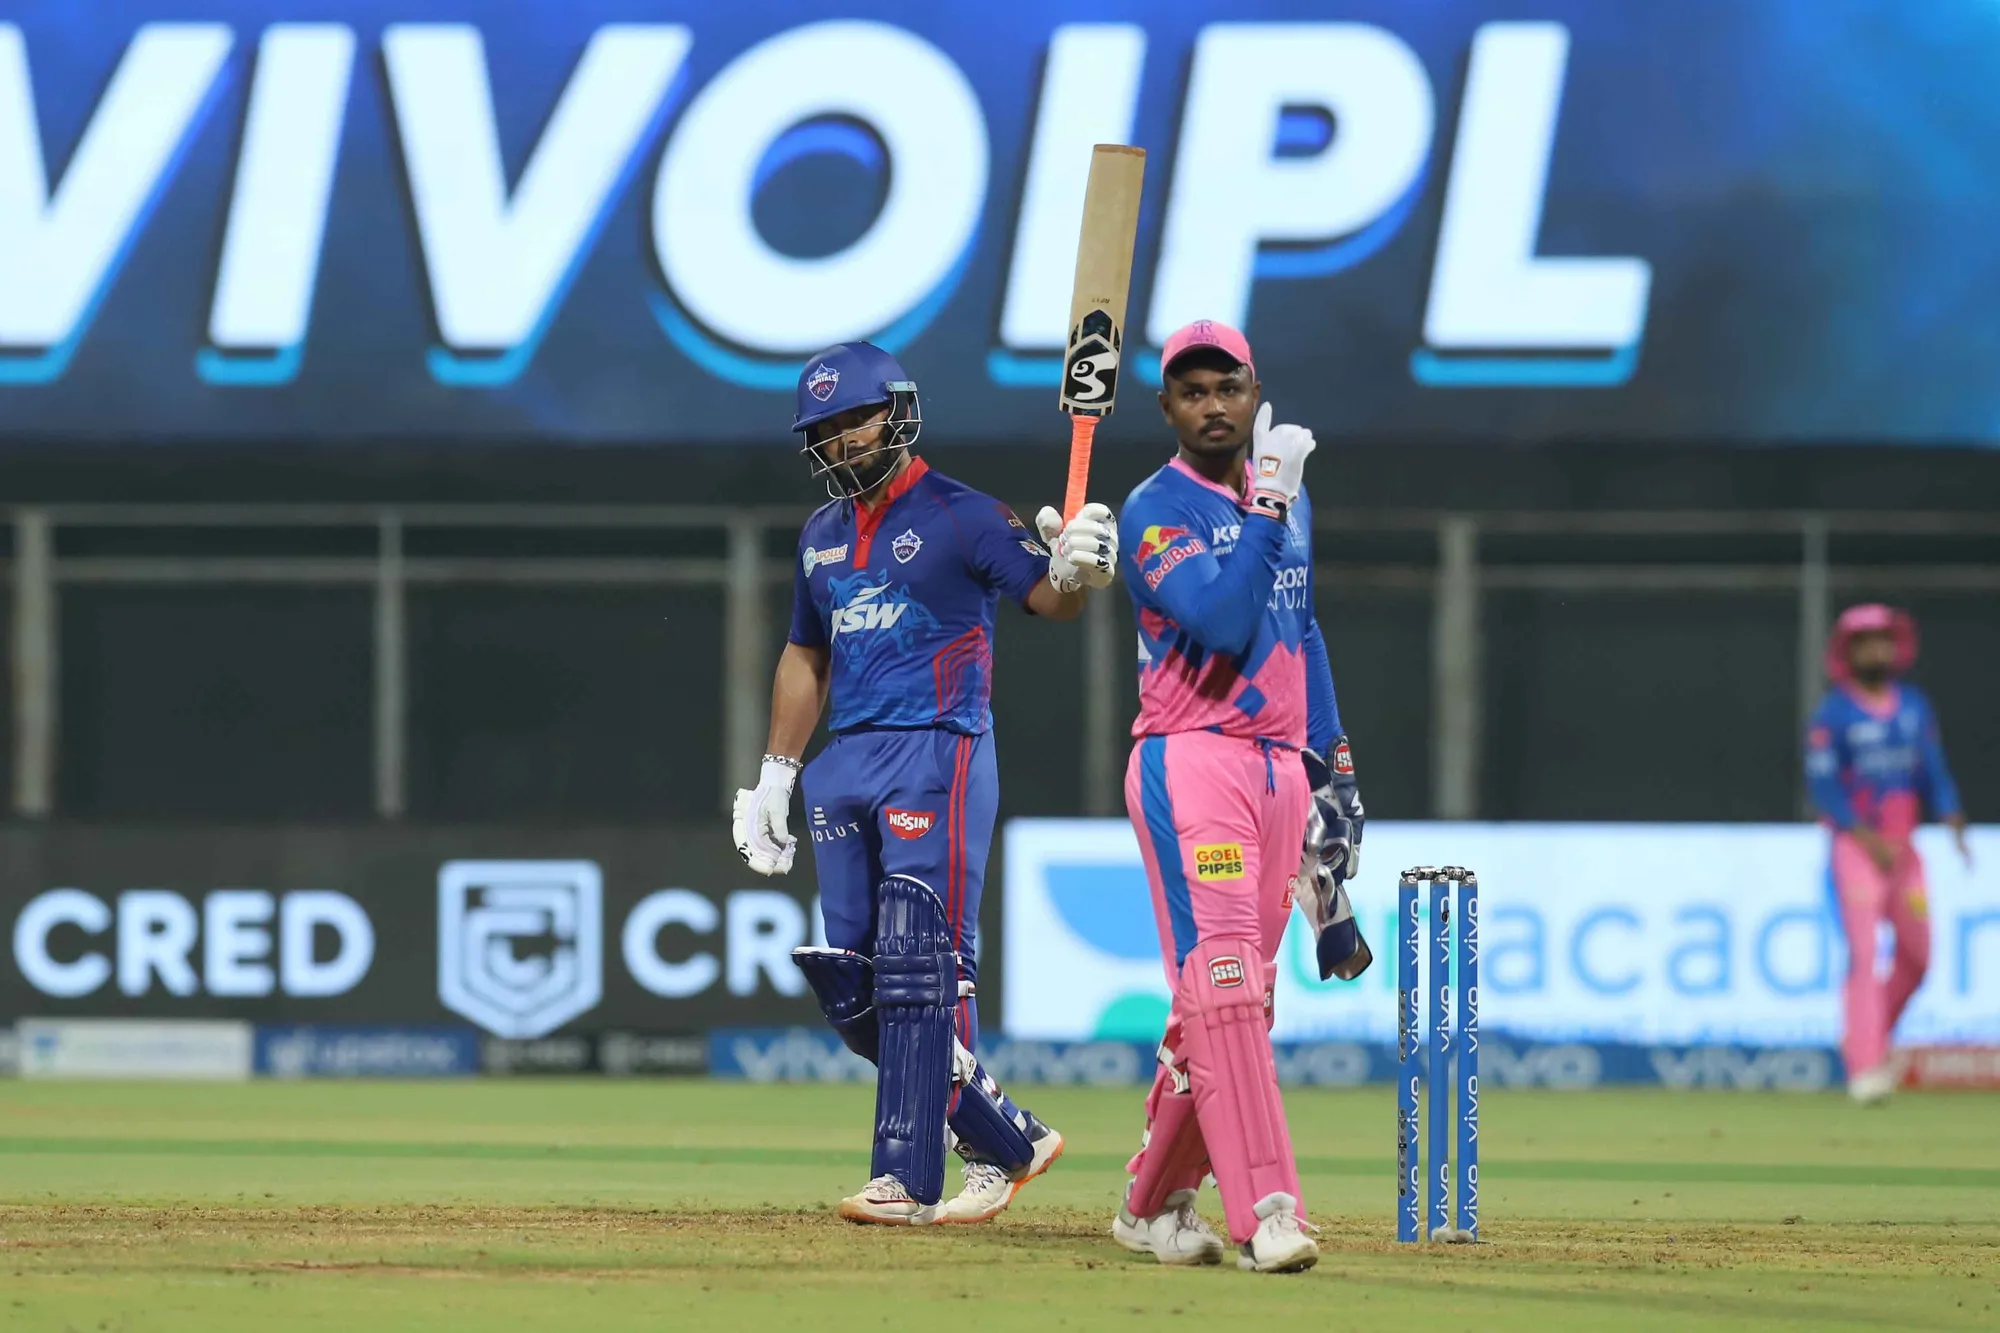 IPL 2021 | DC vs RR: Royals run into indomitable Capitals after spirit-lifting win over Kings